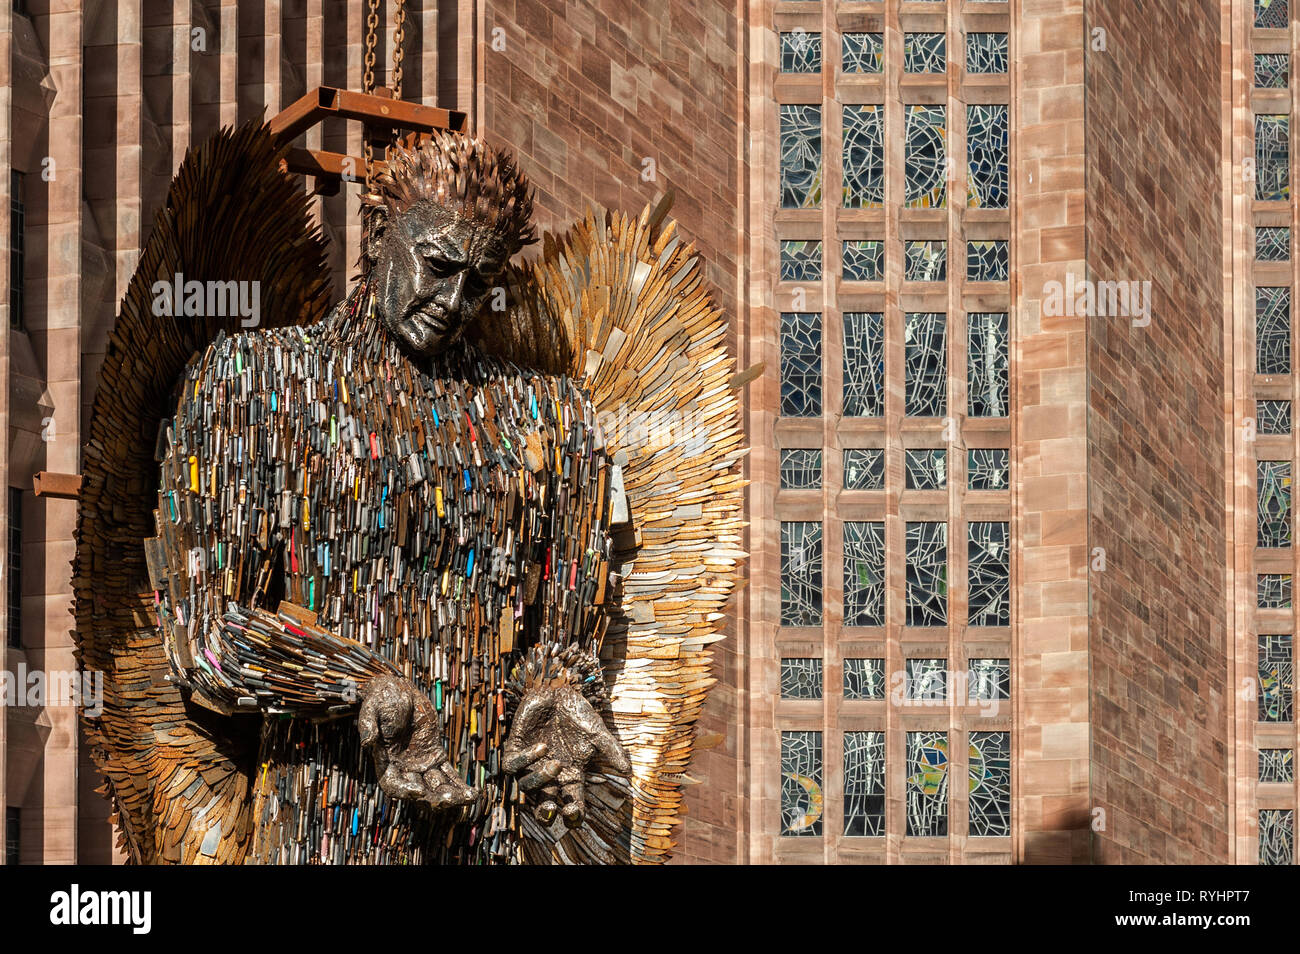 Coventry, West Midlands, UK. 14th March, 2019.  The Knife Angel, which is made up of 100,000 knives which were handed into police forces around the country, was erected outside Coventry Cathedral today. The Knife Angel is a 27 foot high sculpture composed of knives by the artist Alfie Bradley as a physical reminder of the effects of violence and aggression. It is in Coventry until 23rd April. Credit: AG News/Alamy Live News. Stock Photo